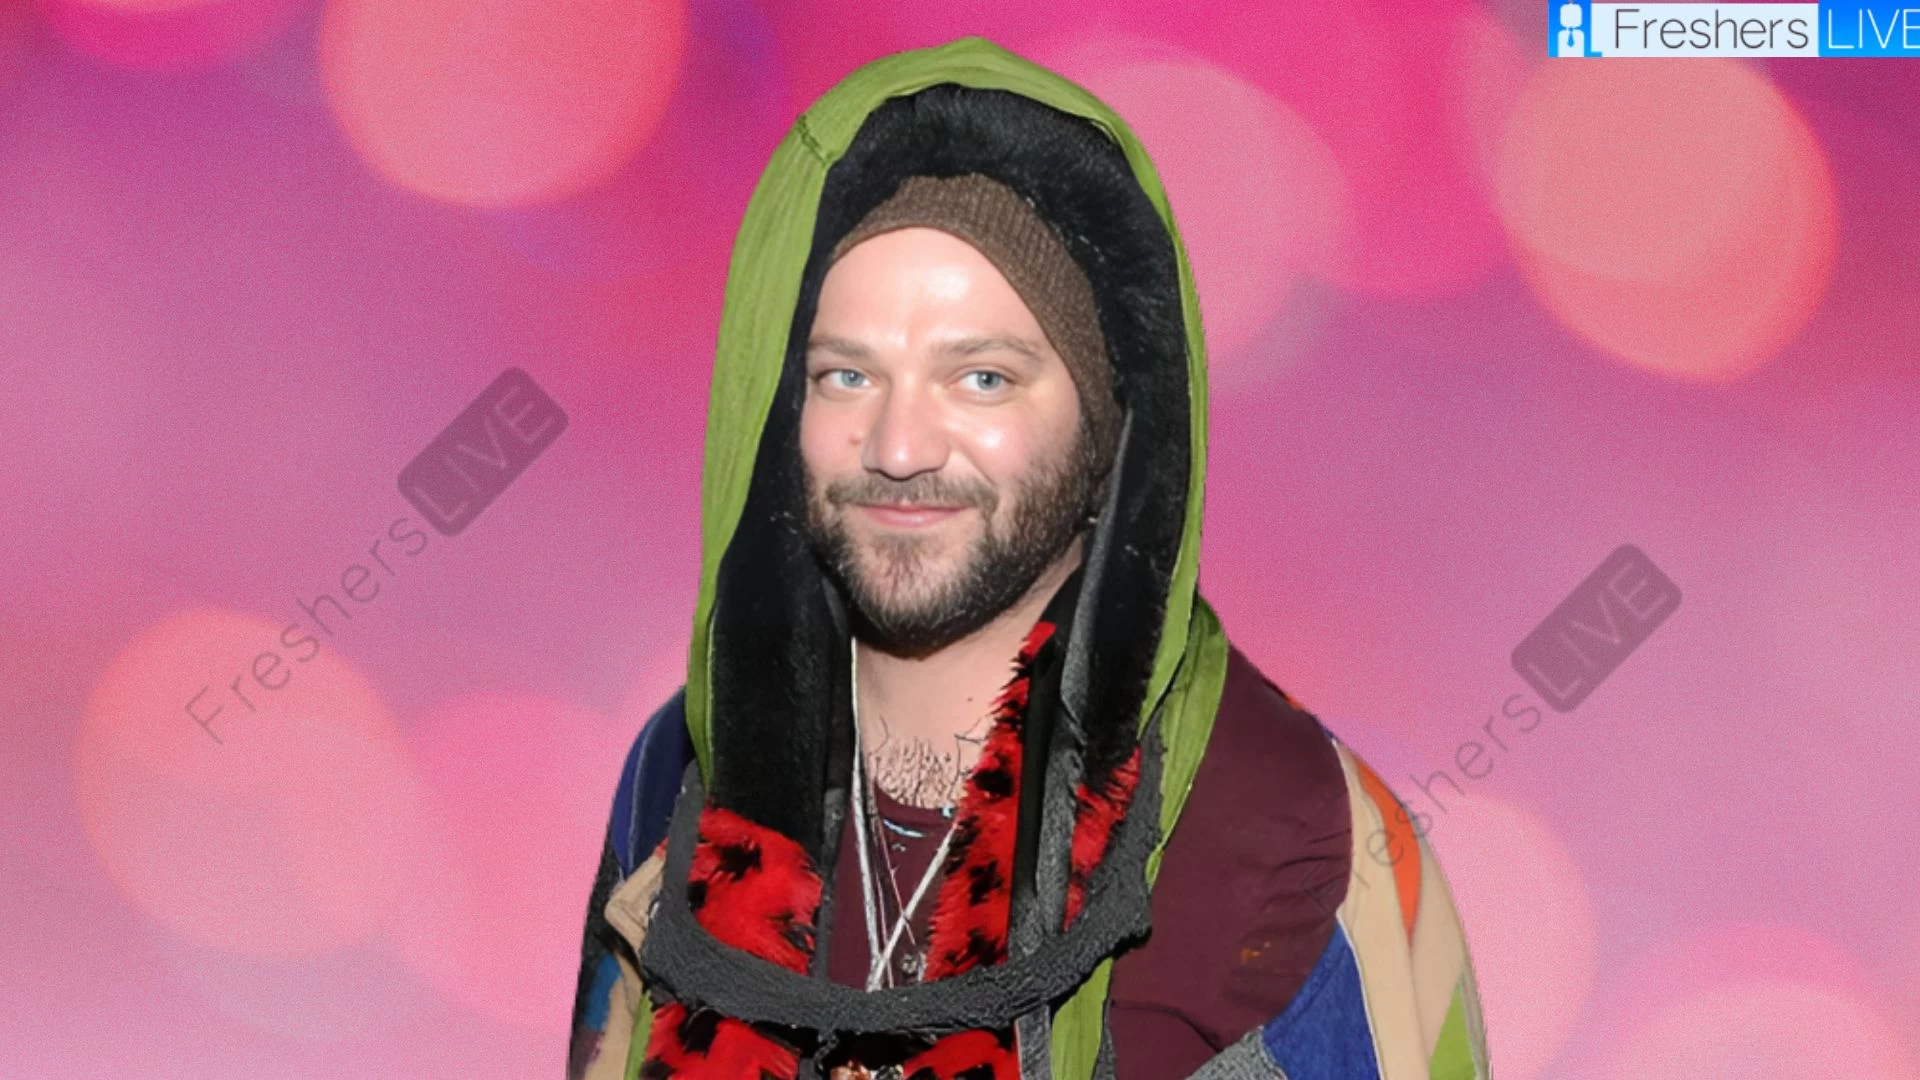 Bam Margera Religion What Religion is Bam Margera? Is Bam Margera a Christianity?